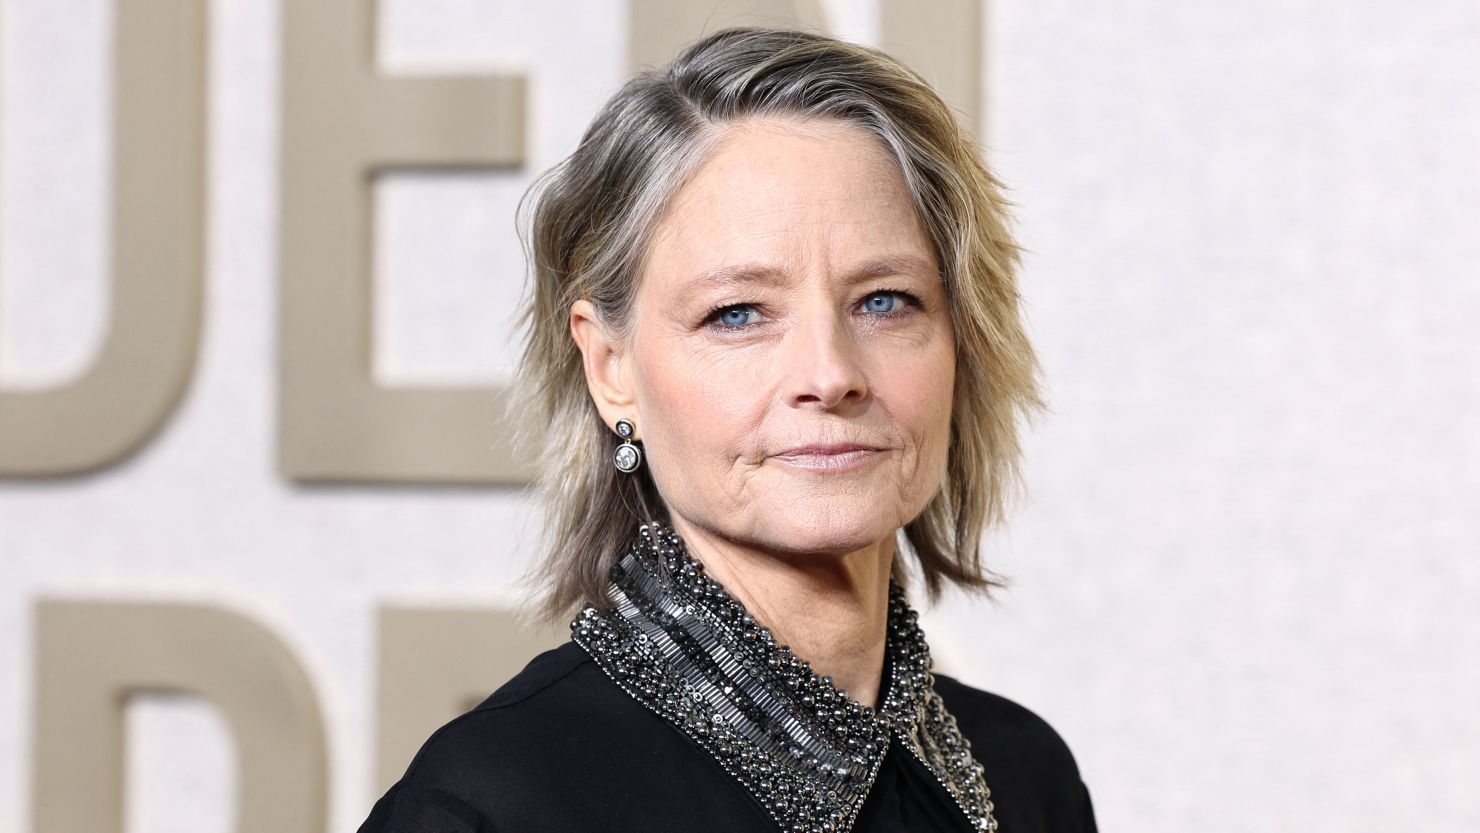 Jodie Foster describes what she finds ‘really annoying’ about working